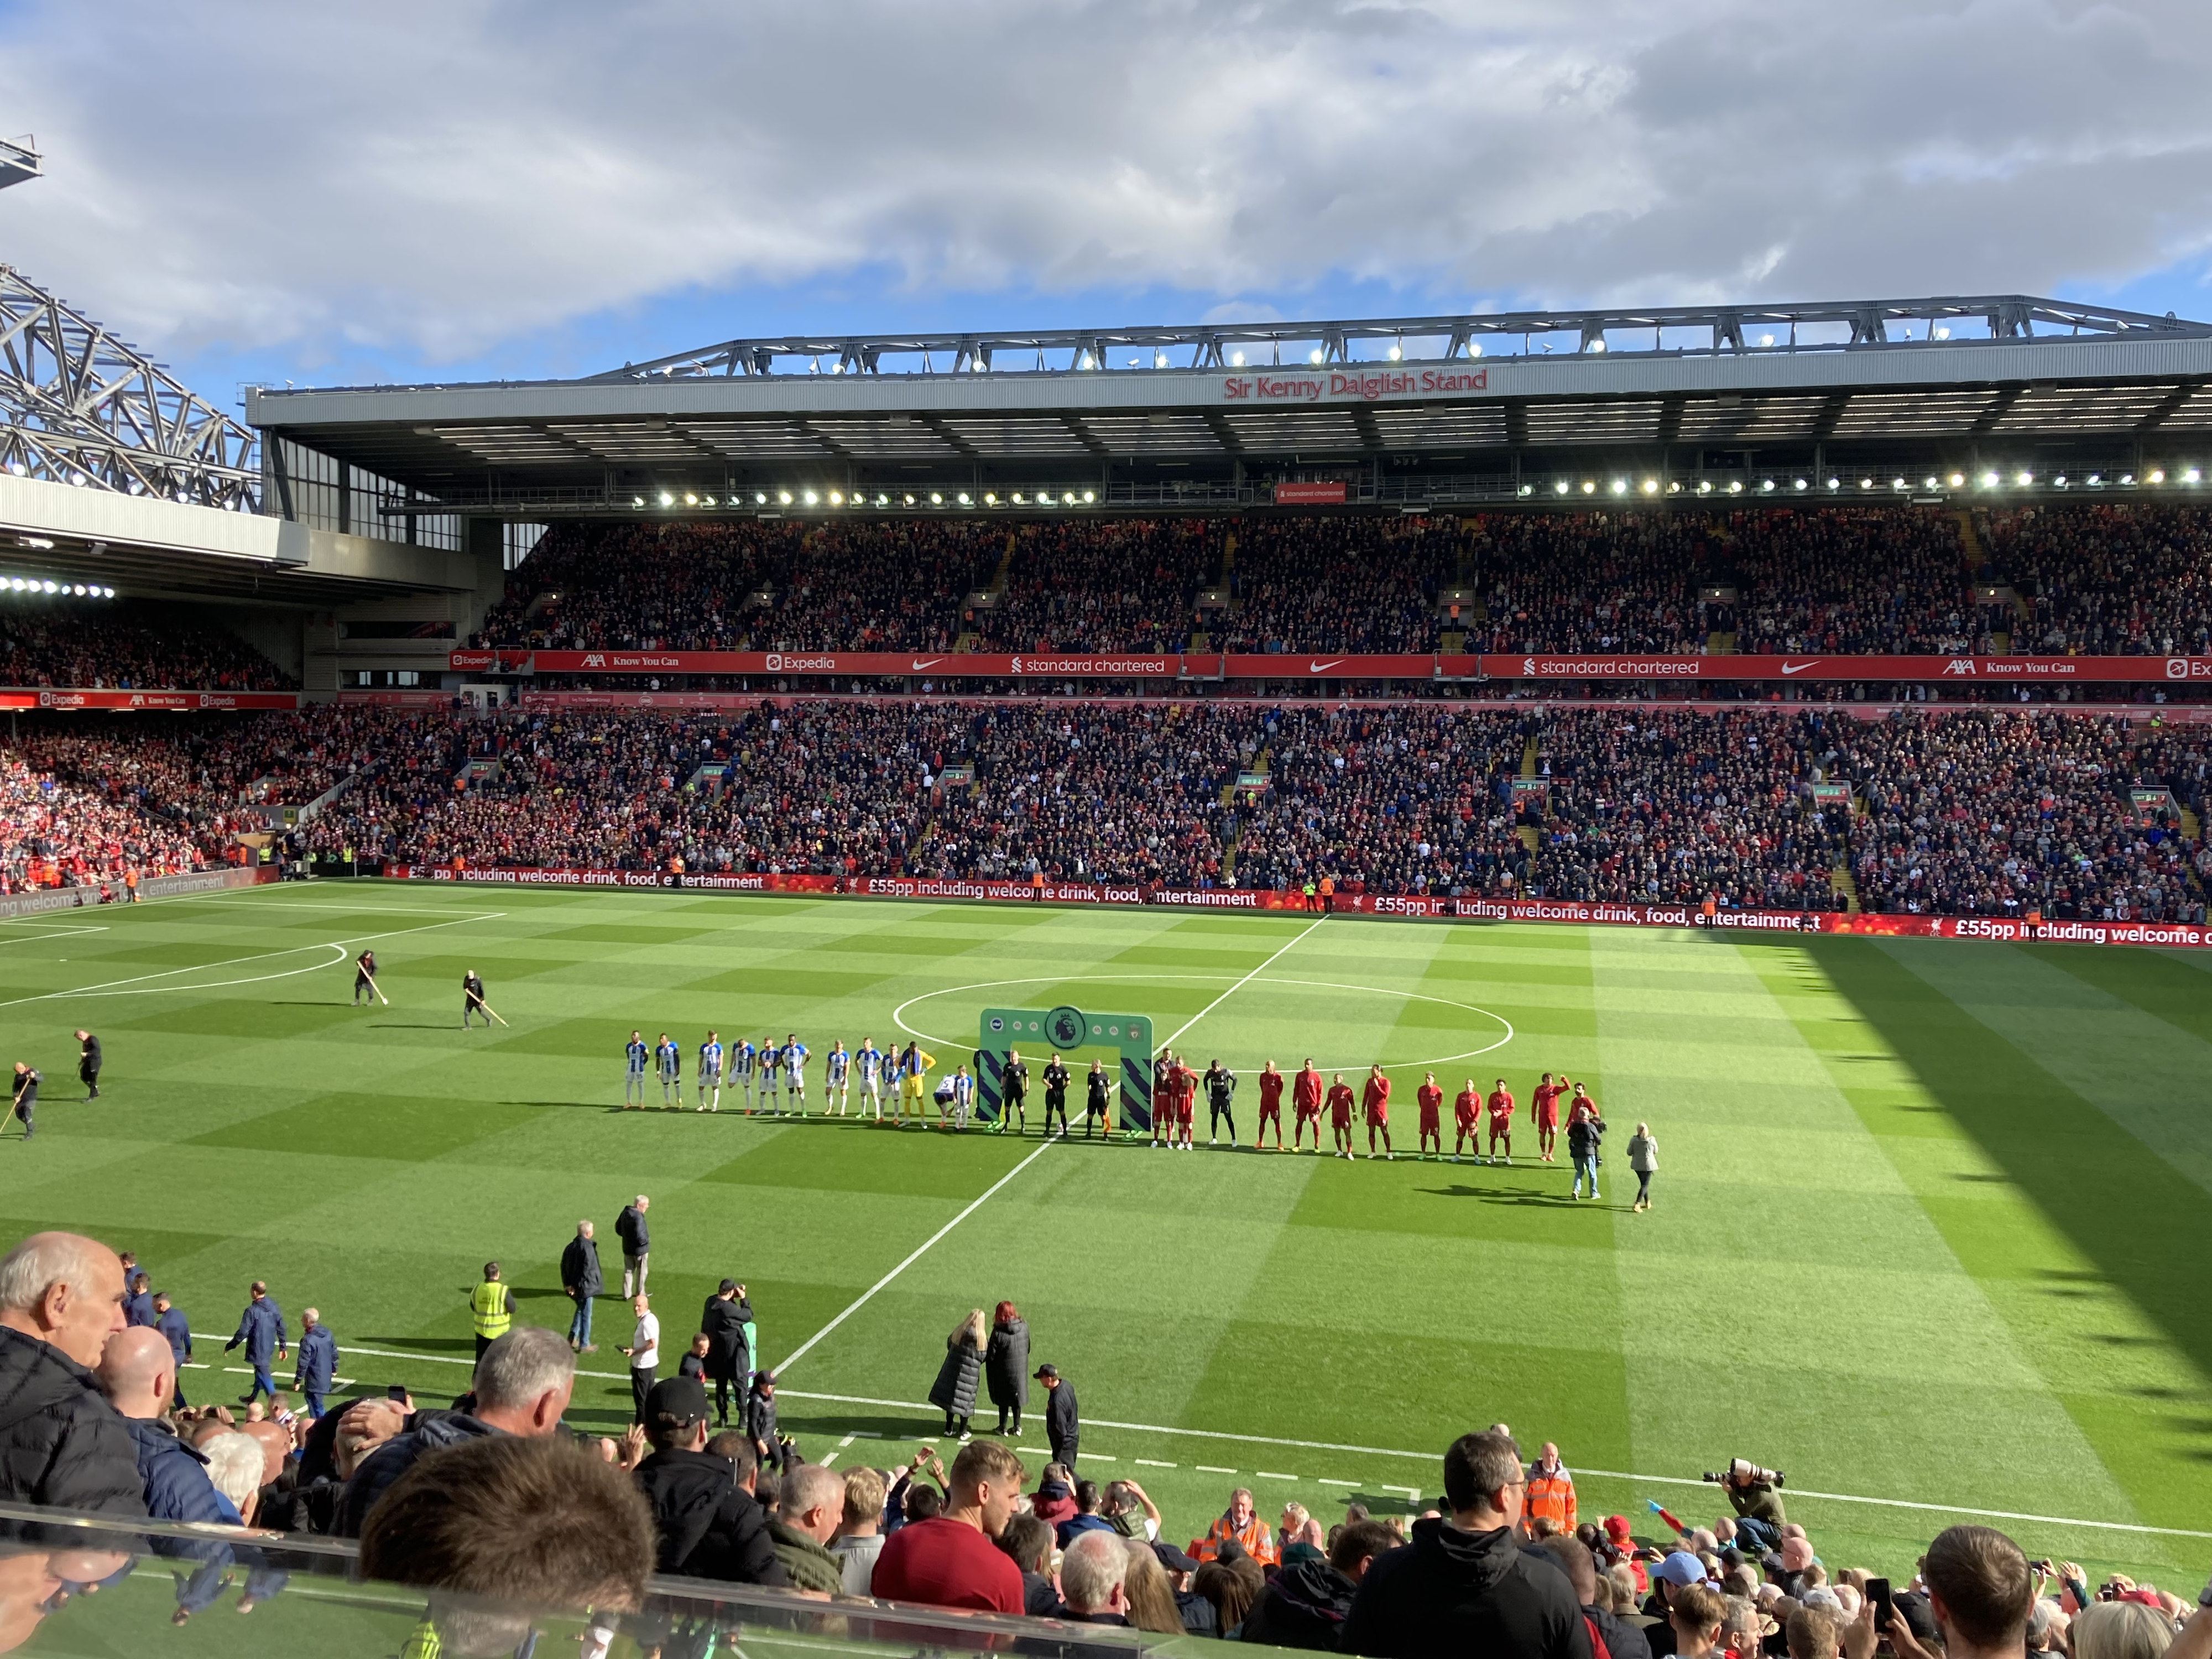 Brian Owen reviews Albion’s thriller at Anfield to launch the RDZ era